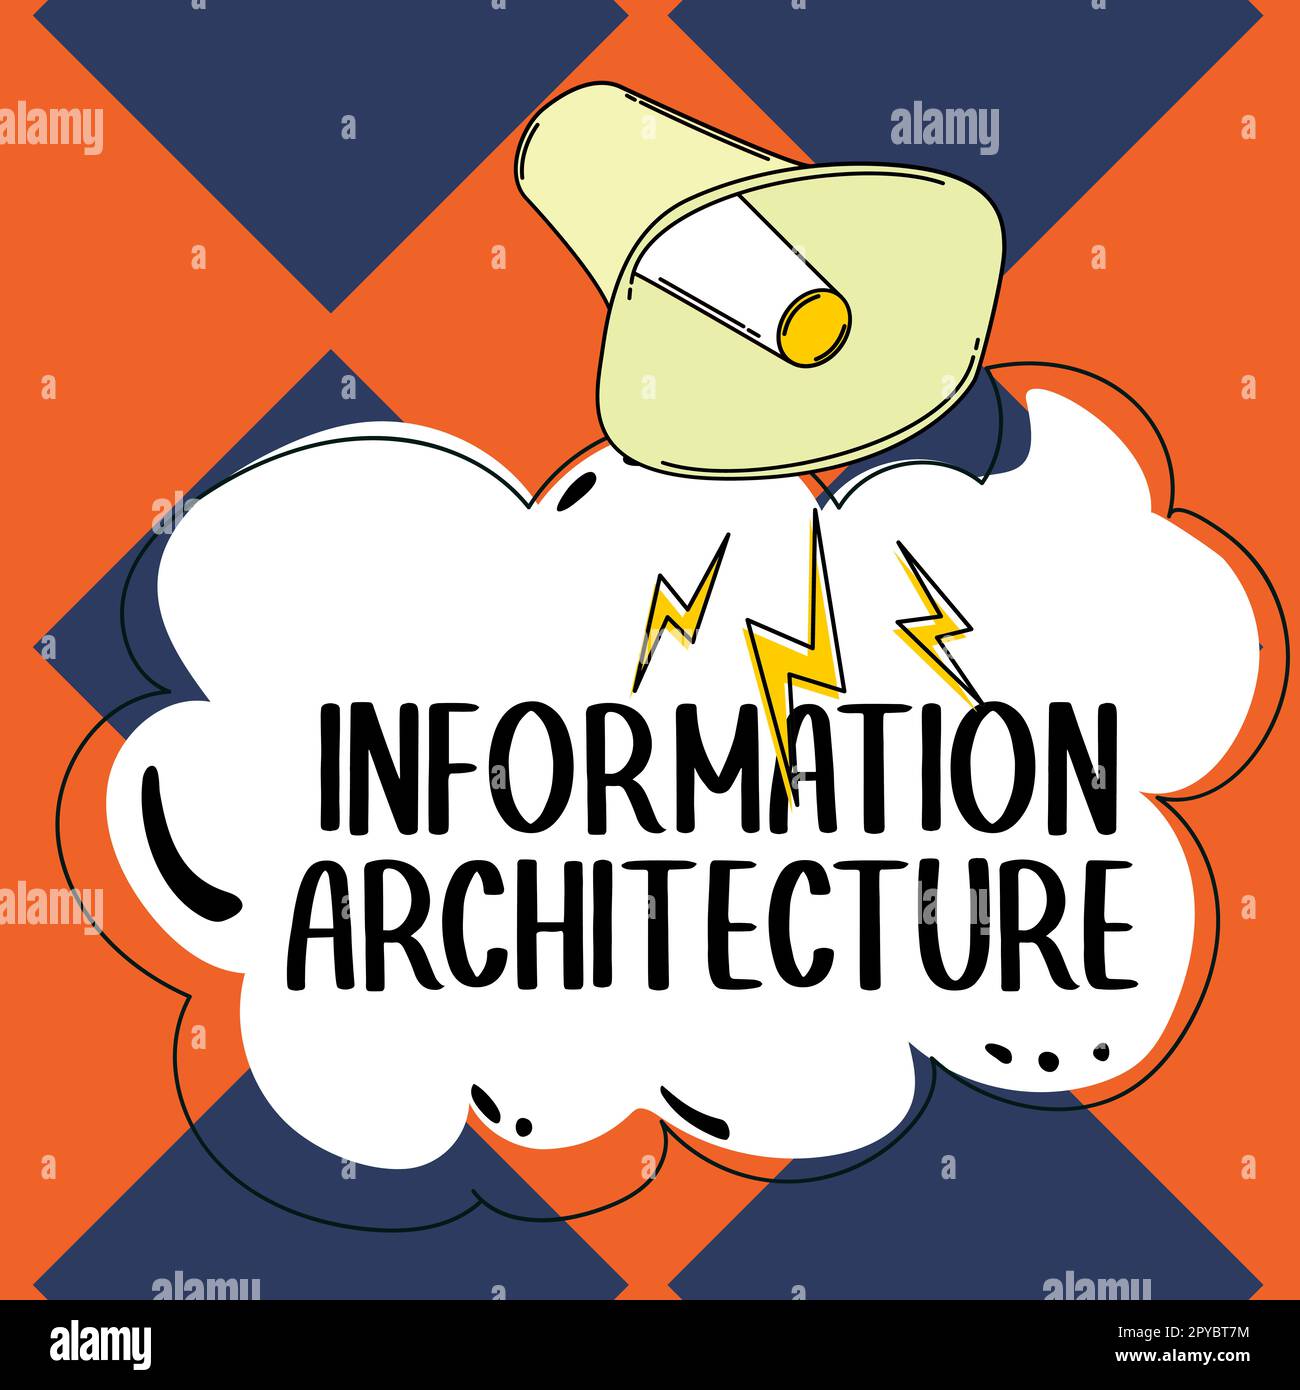 Text showing inspiration Information Architecture. Internet Concept structural design shared information environments Stock Photo